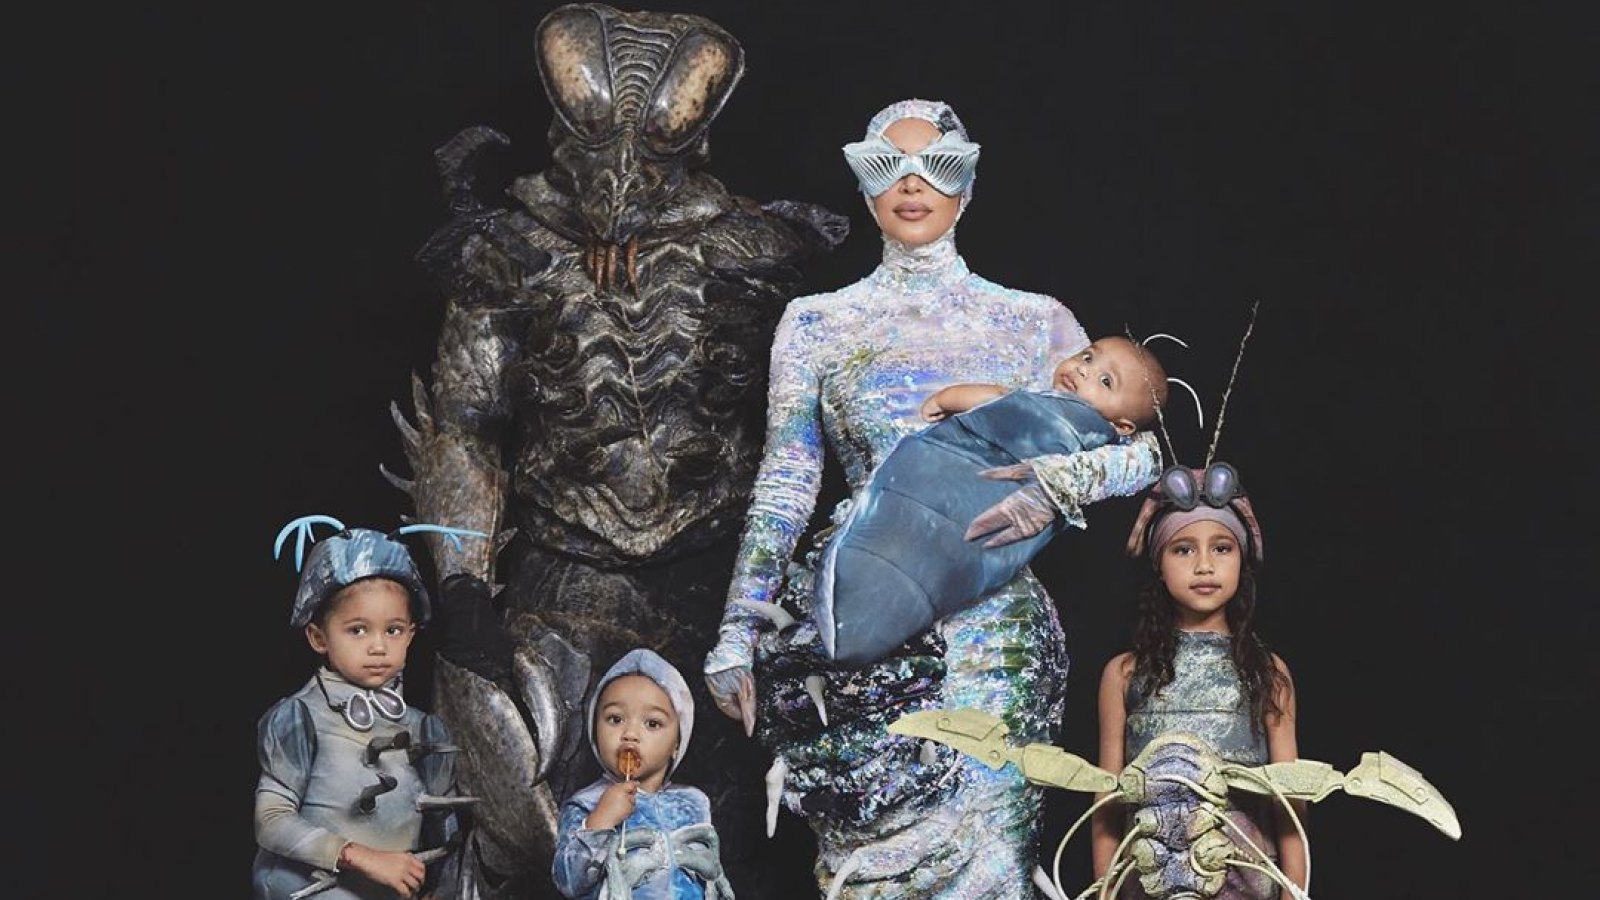 Kim Kardashian Shares Belated Family Halloween Costumes: ‘West Worms,’ 'Sing'